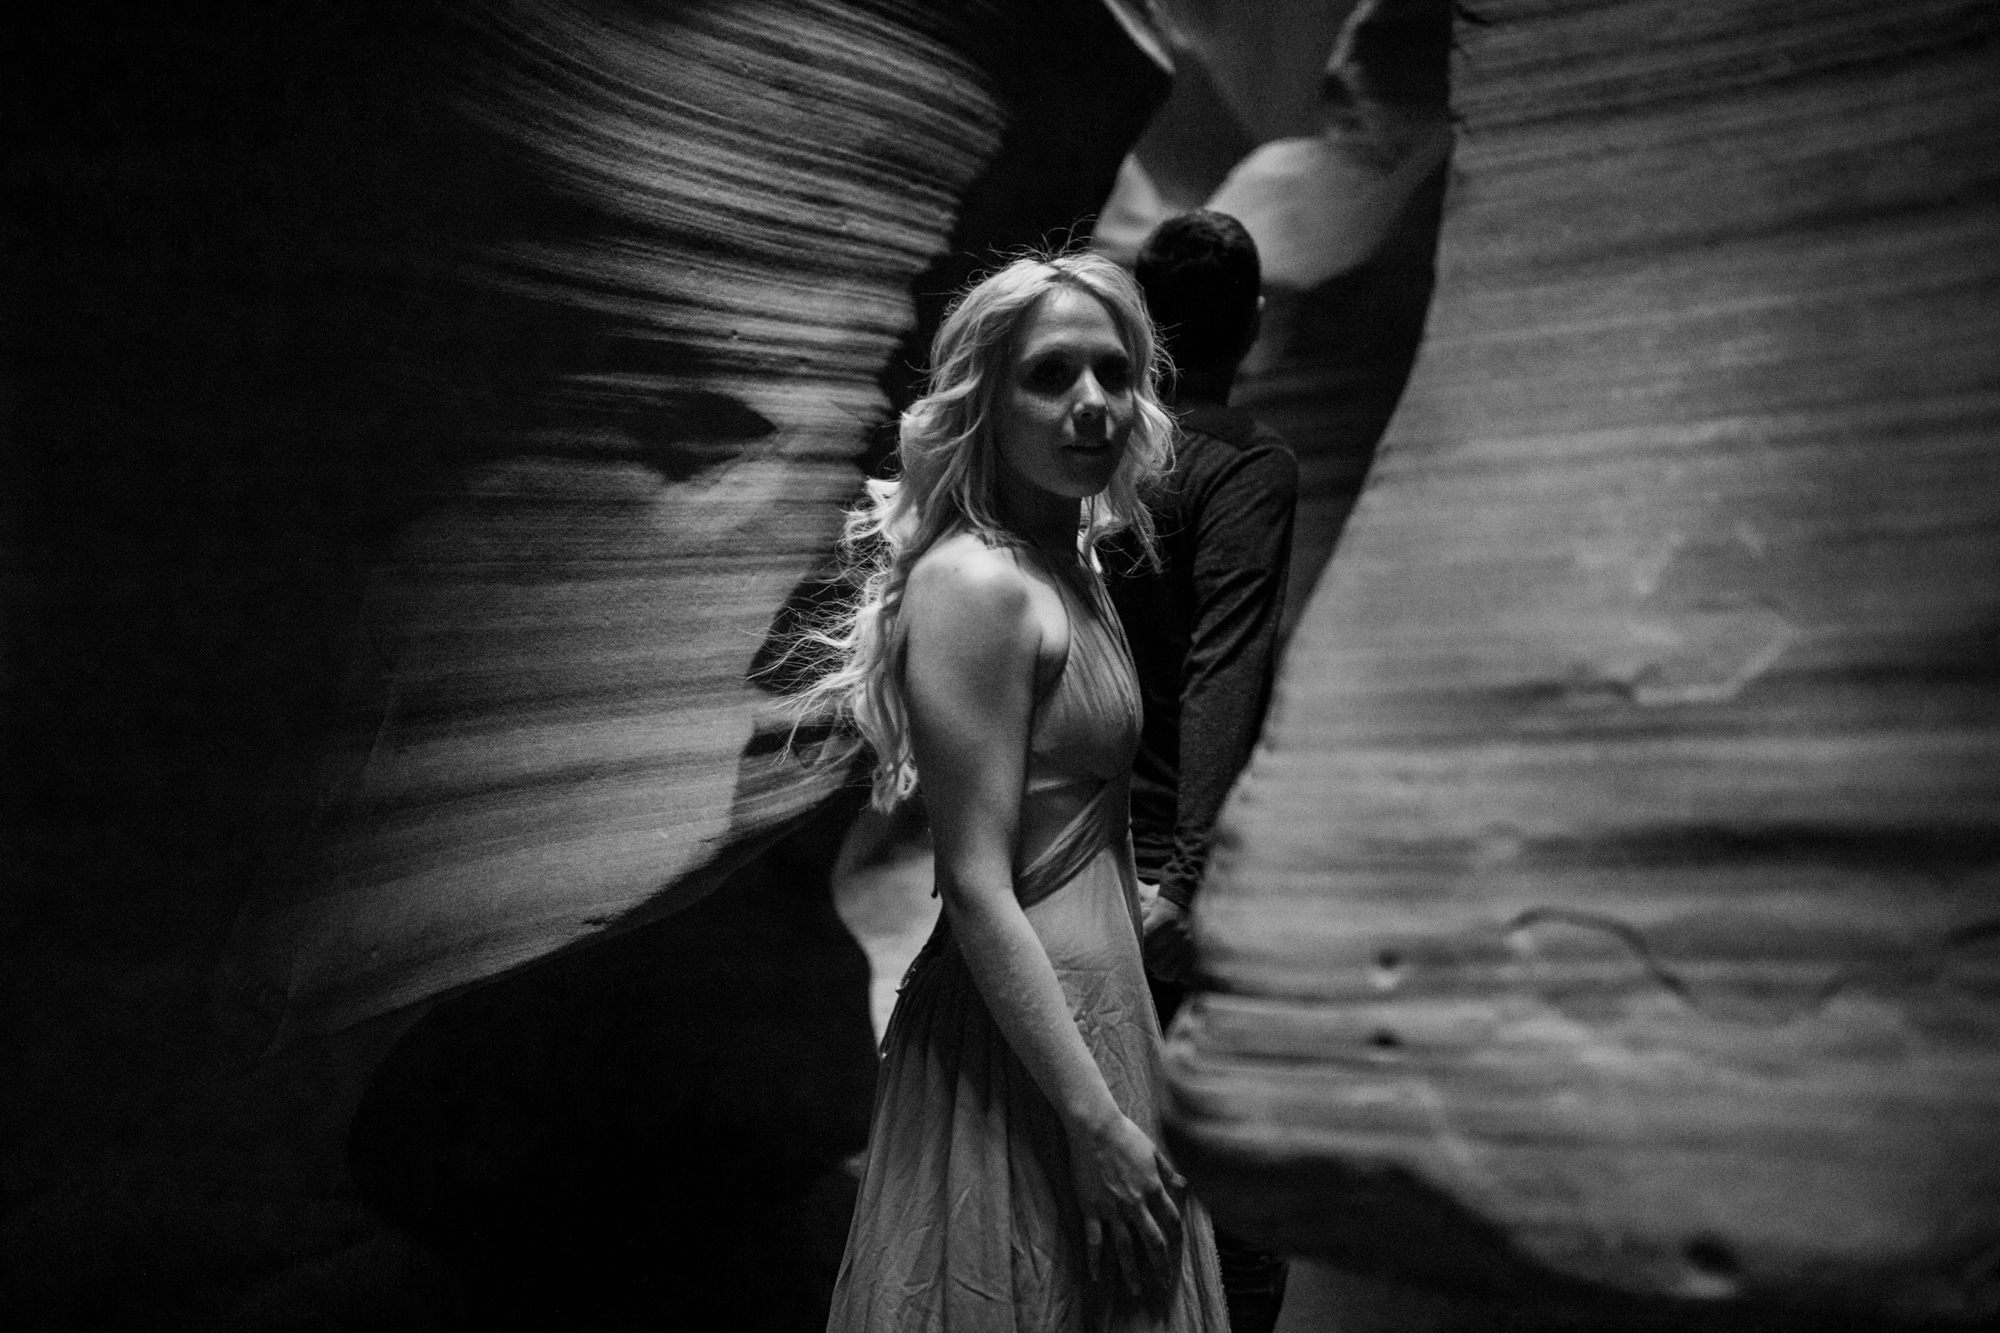 chelsea + jorge's day-after wedding adventure session in page, arizona | antelope canyon | adventure elopement photographer | the hearnes adventure photography | www.thehearnes.com